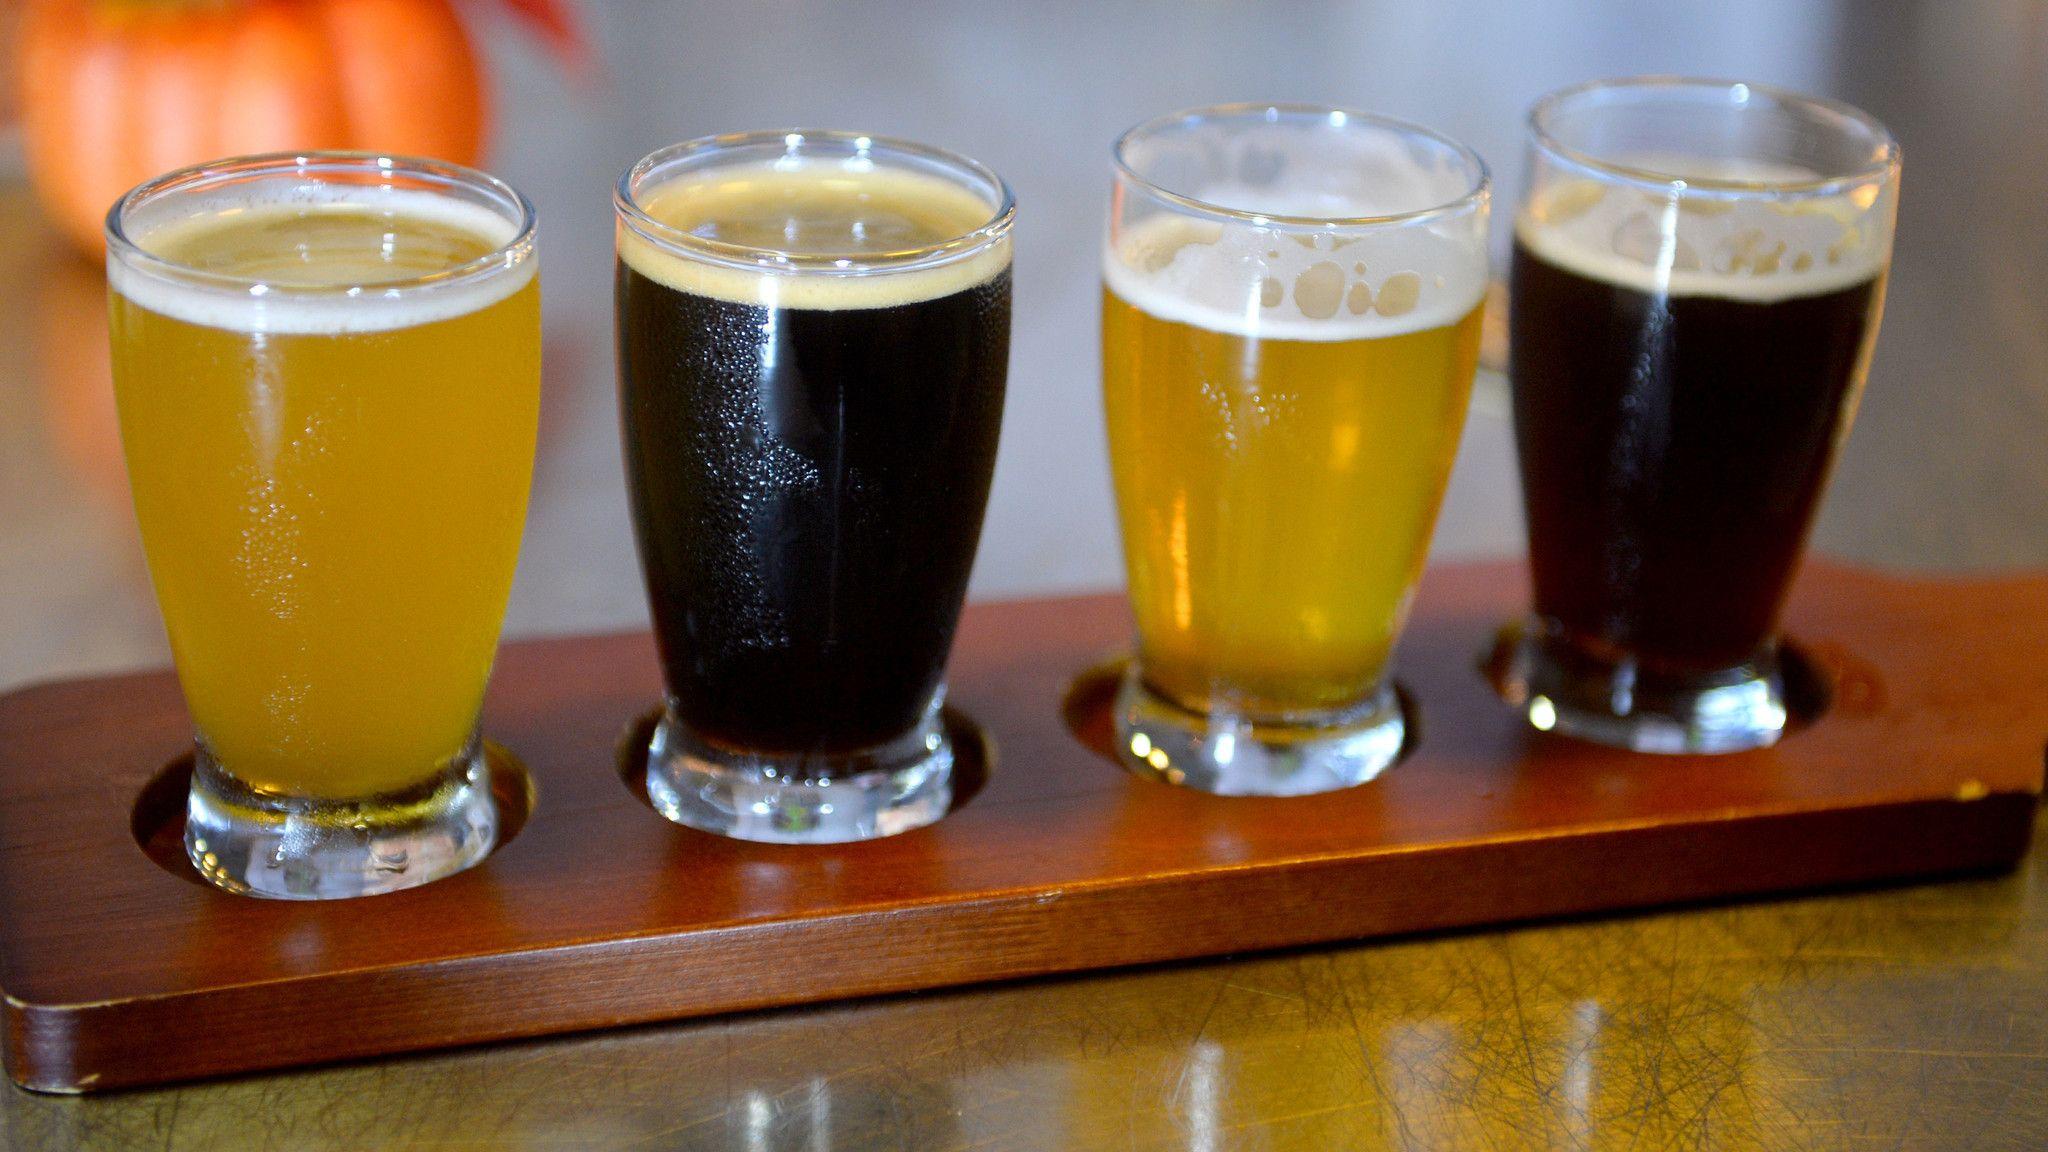 NATIONALBEERDAY: Best places to drink beer in the Lehigh Valley